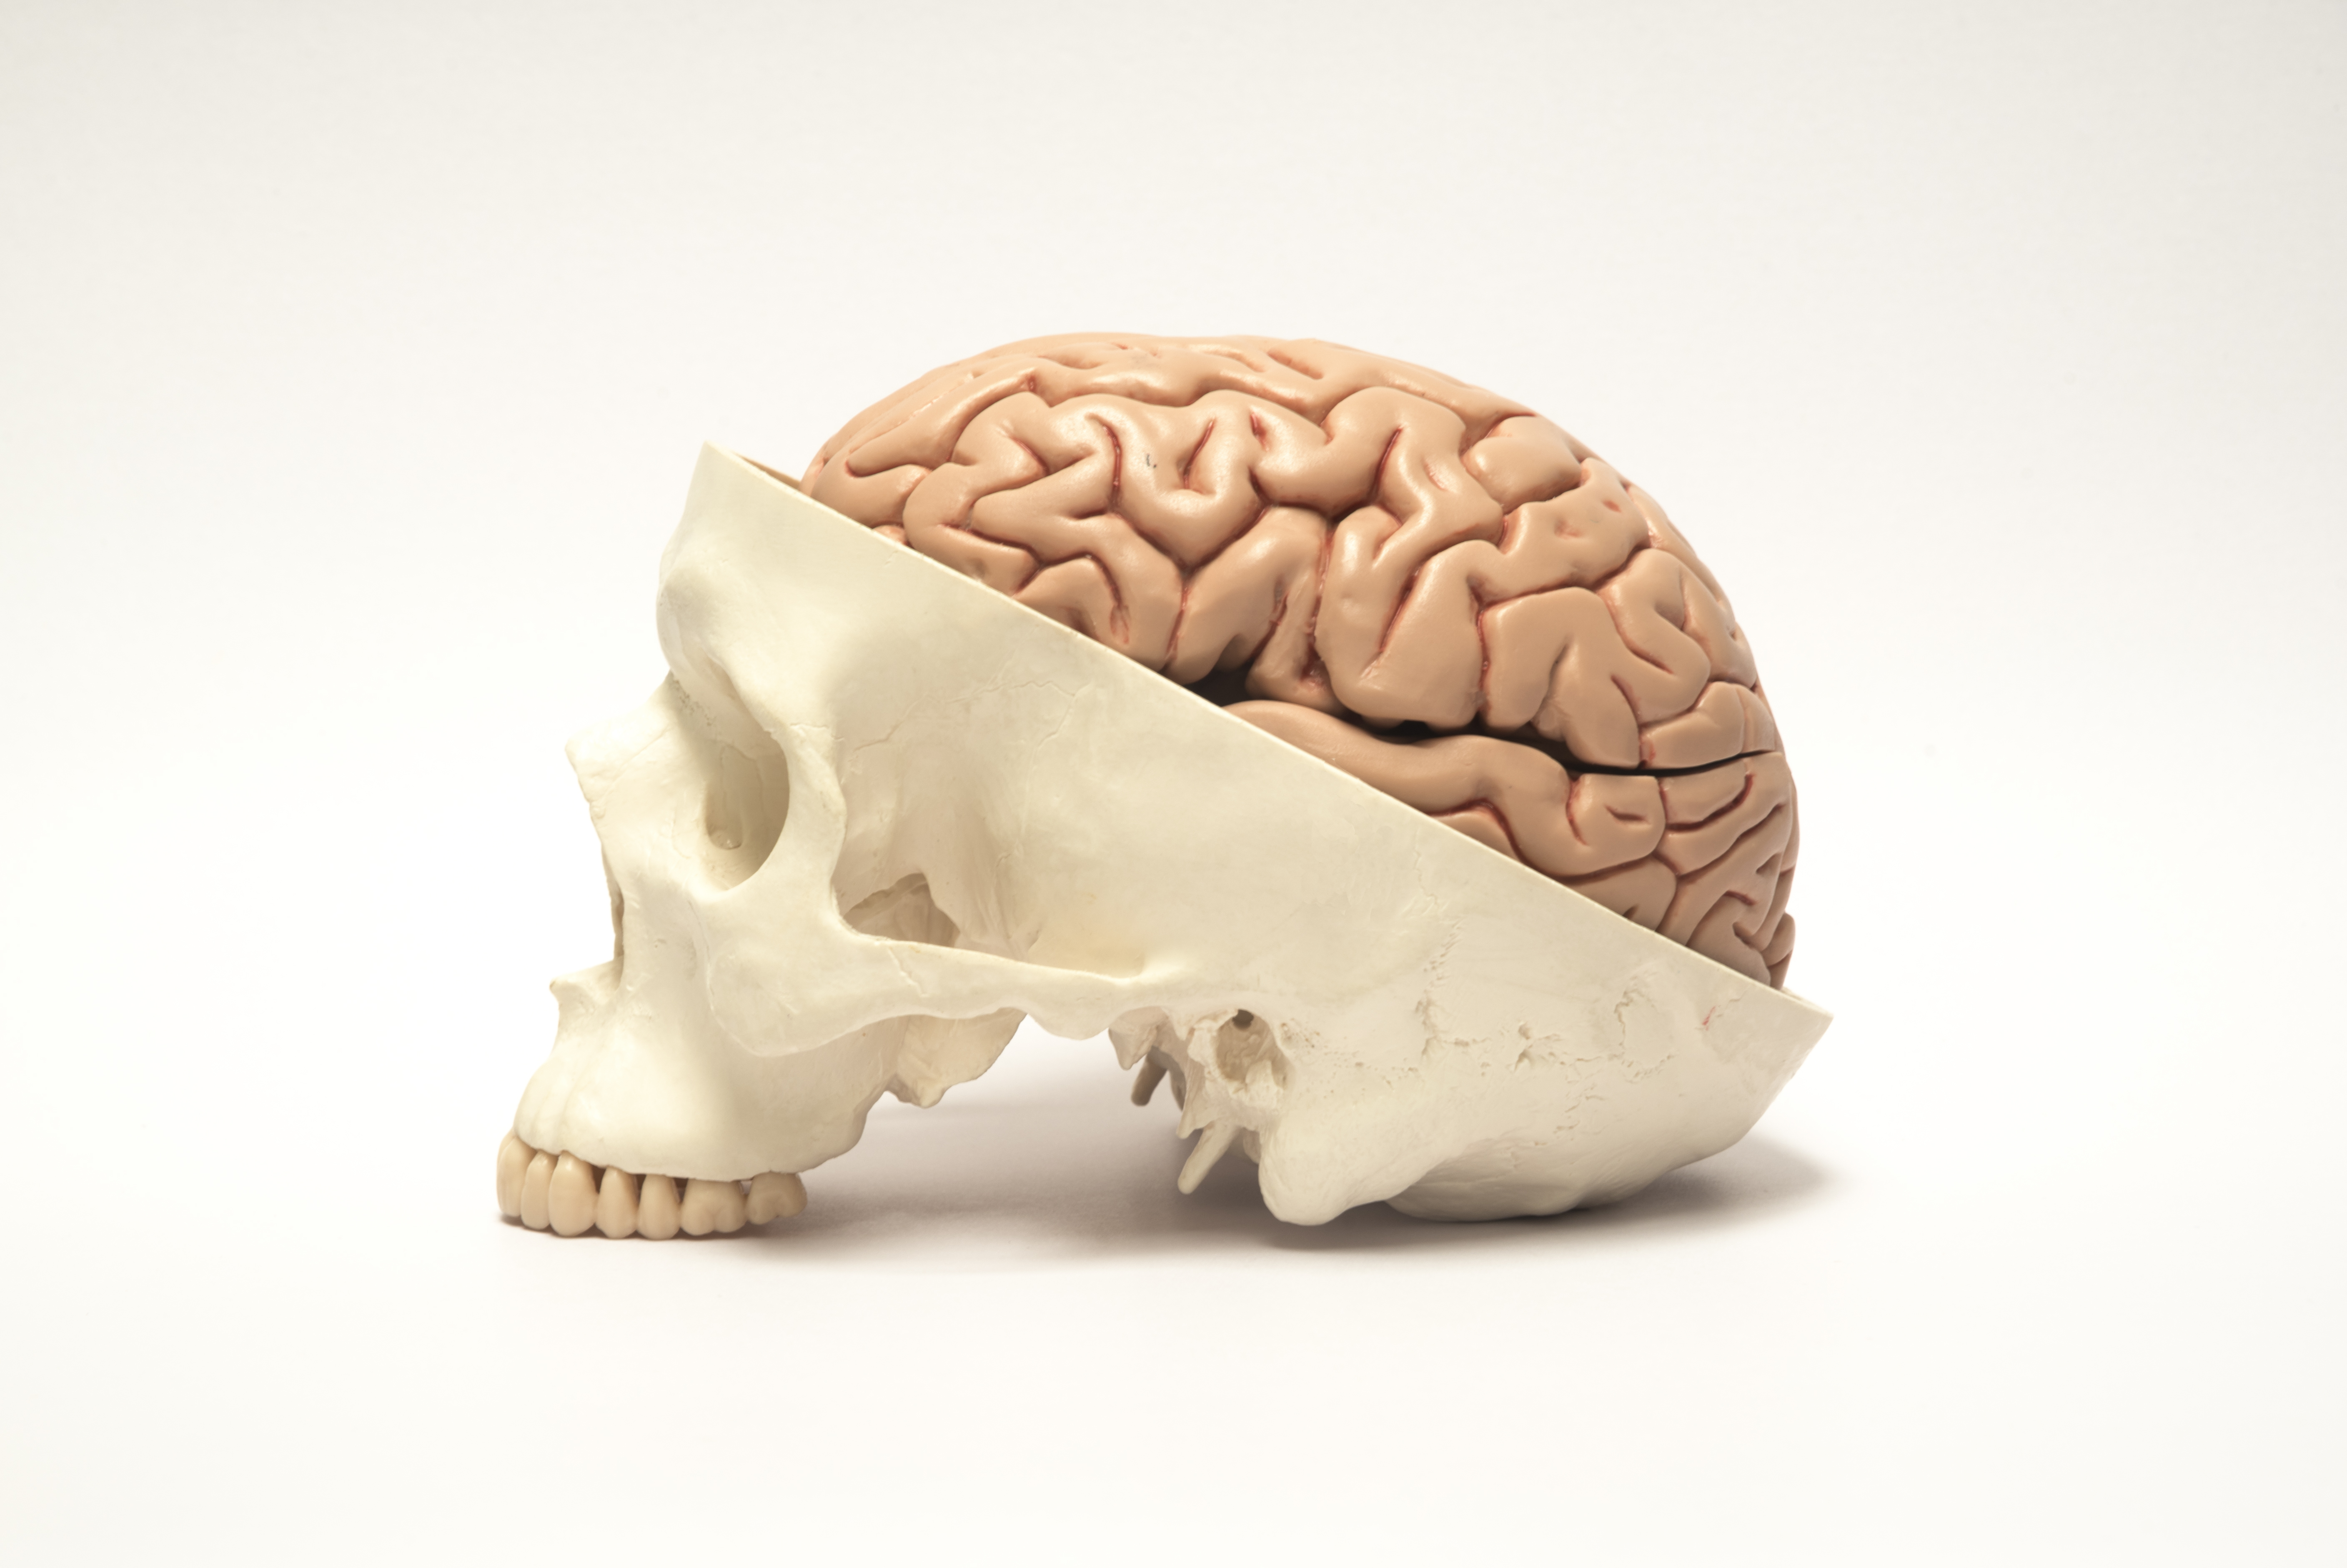 What maths does: Geometry, skull growth and brain mechanics